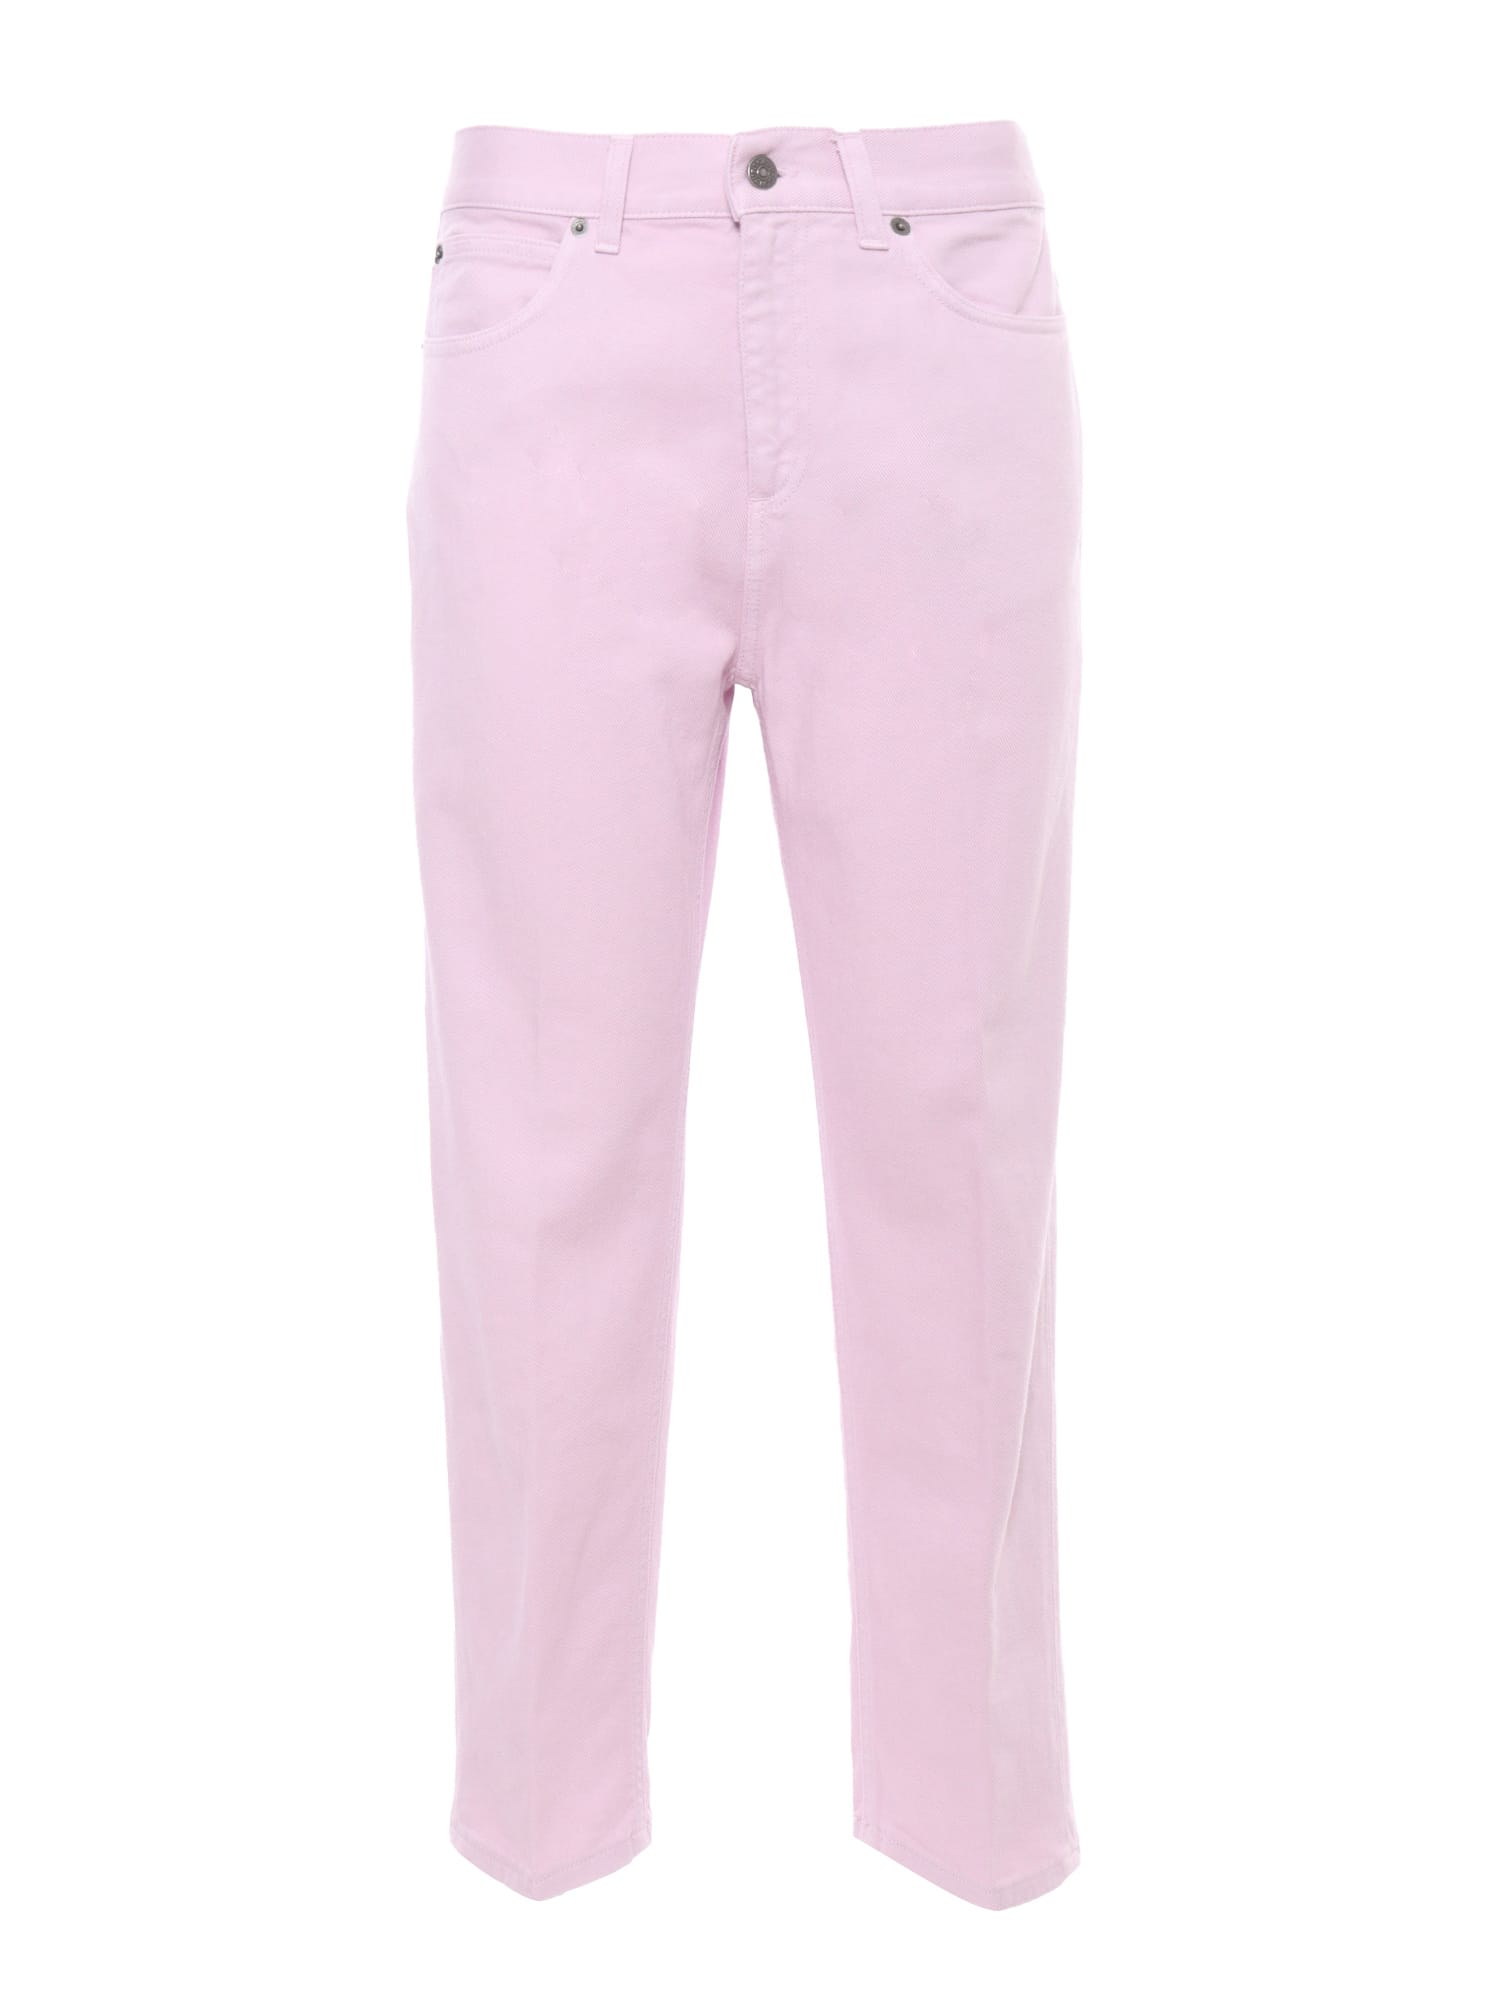 High-waisted Pink Jeans